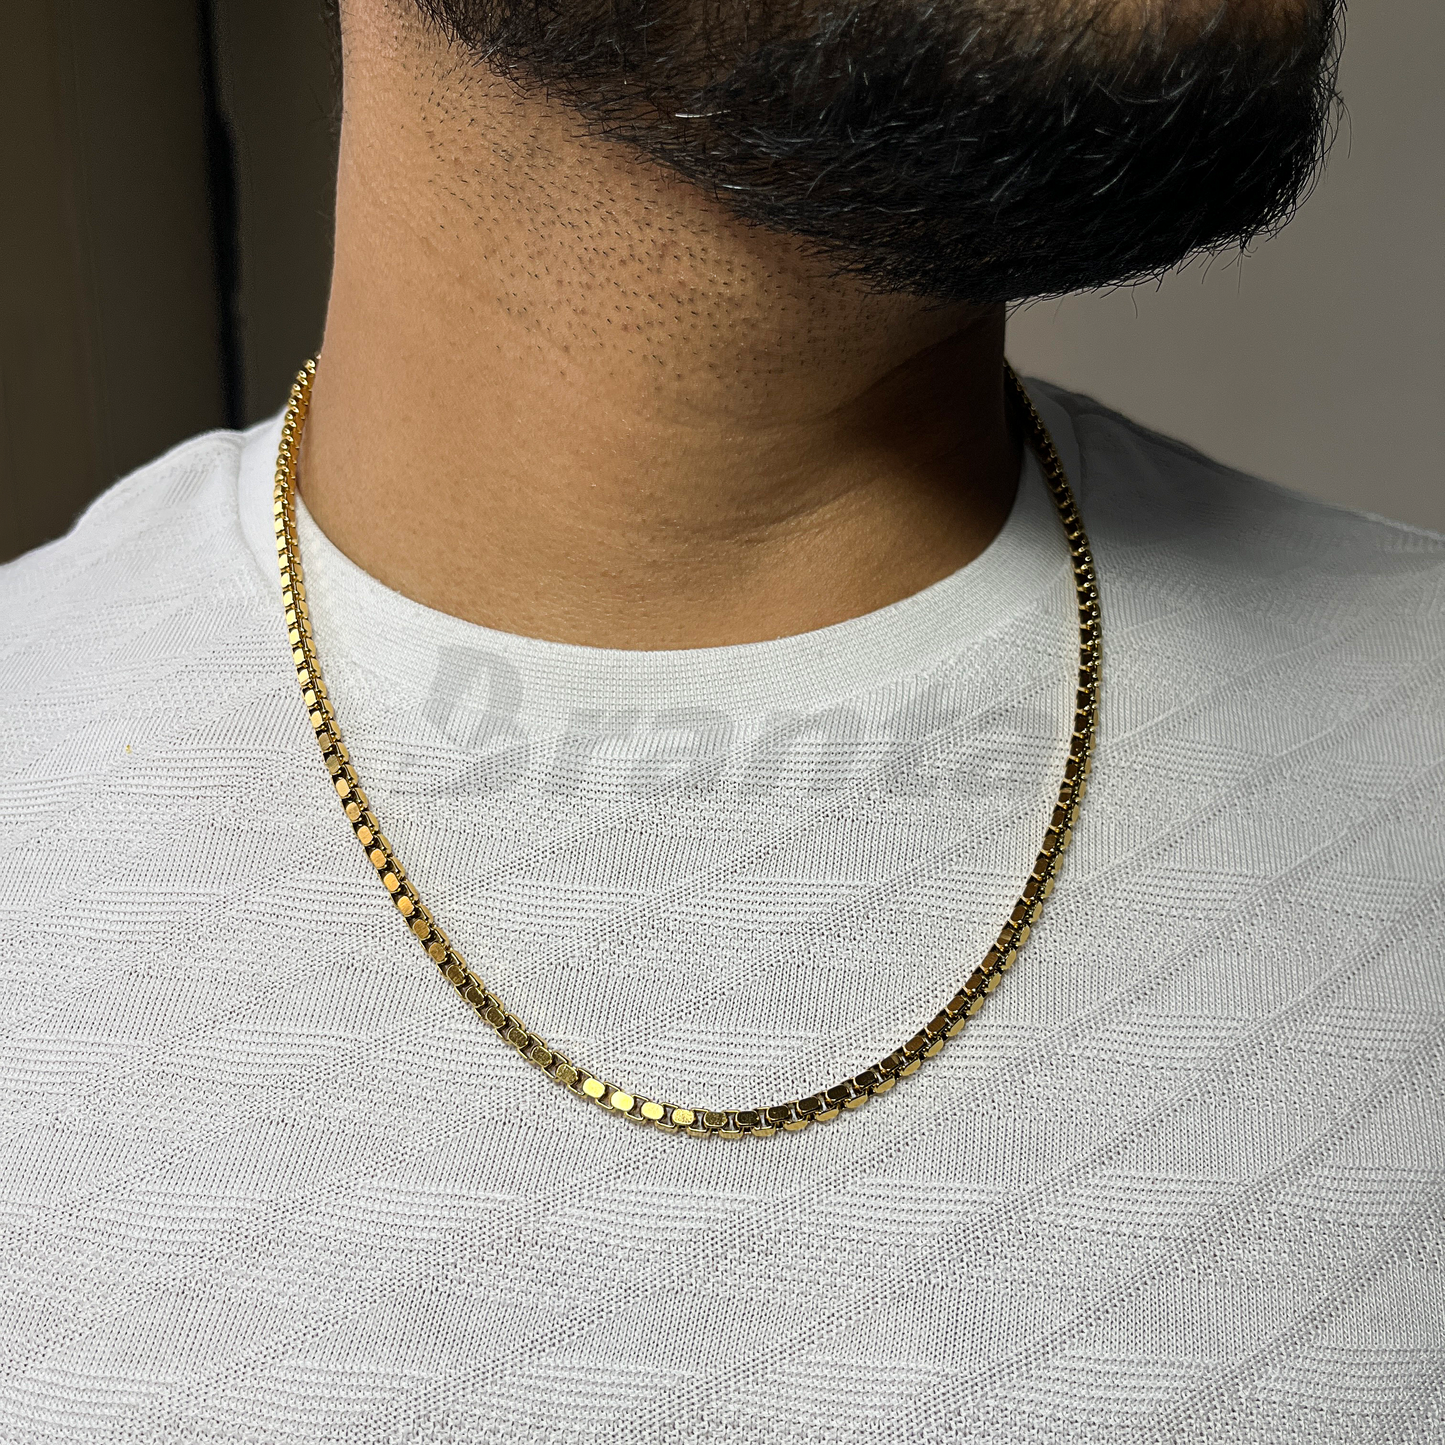 Gold Plated Italian Box Chain For Men (21 Inch)